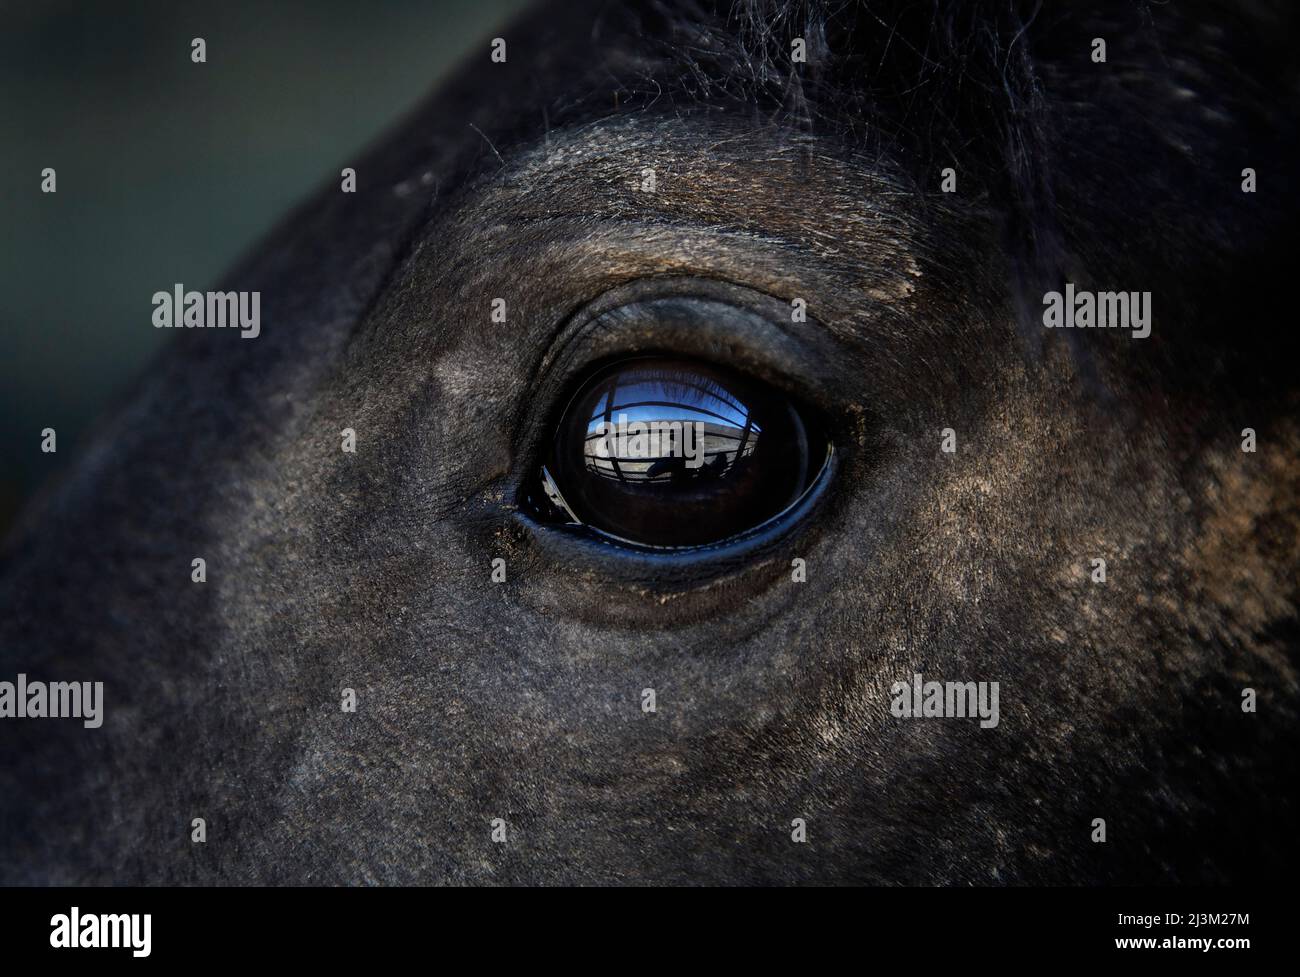 Reflection of cowboy in horse's eye, a captured wild horse eyes his surroundings after capture; Winnemucca, Nevada, United States of America Stock Photo